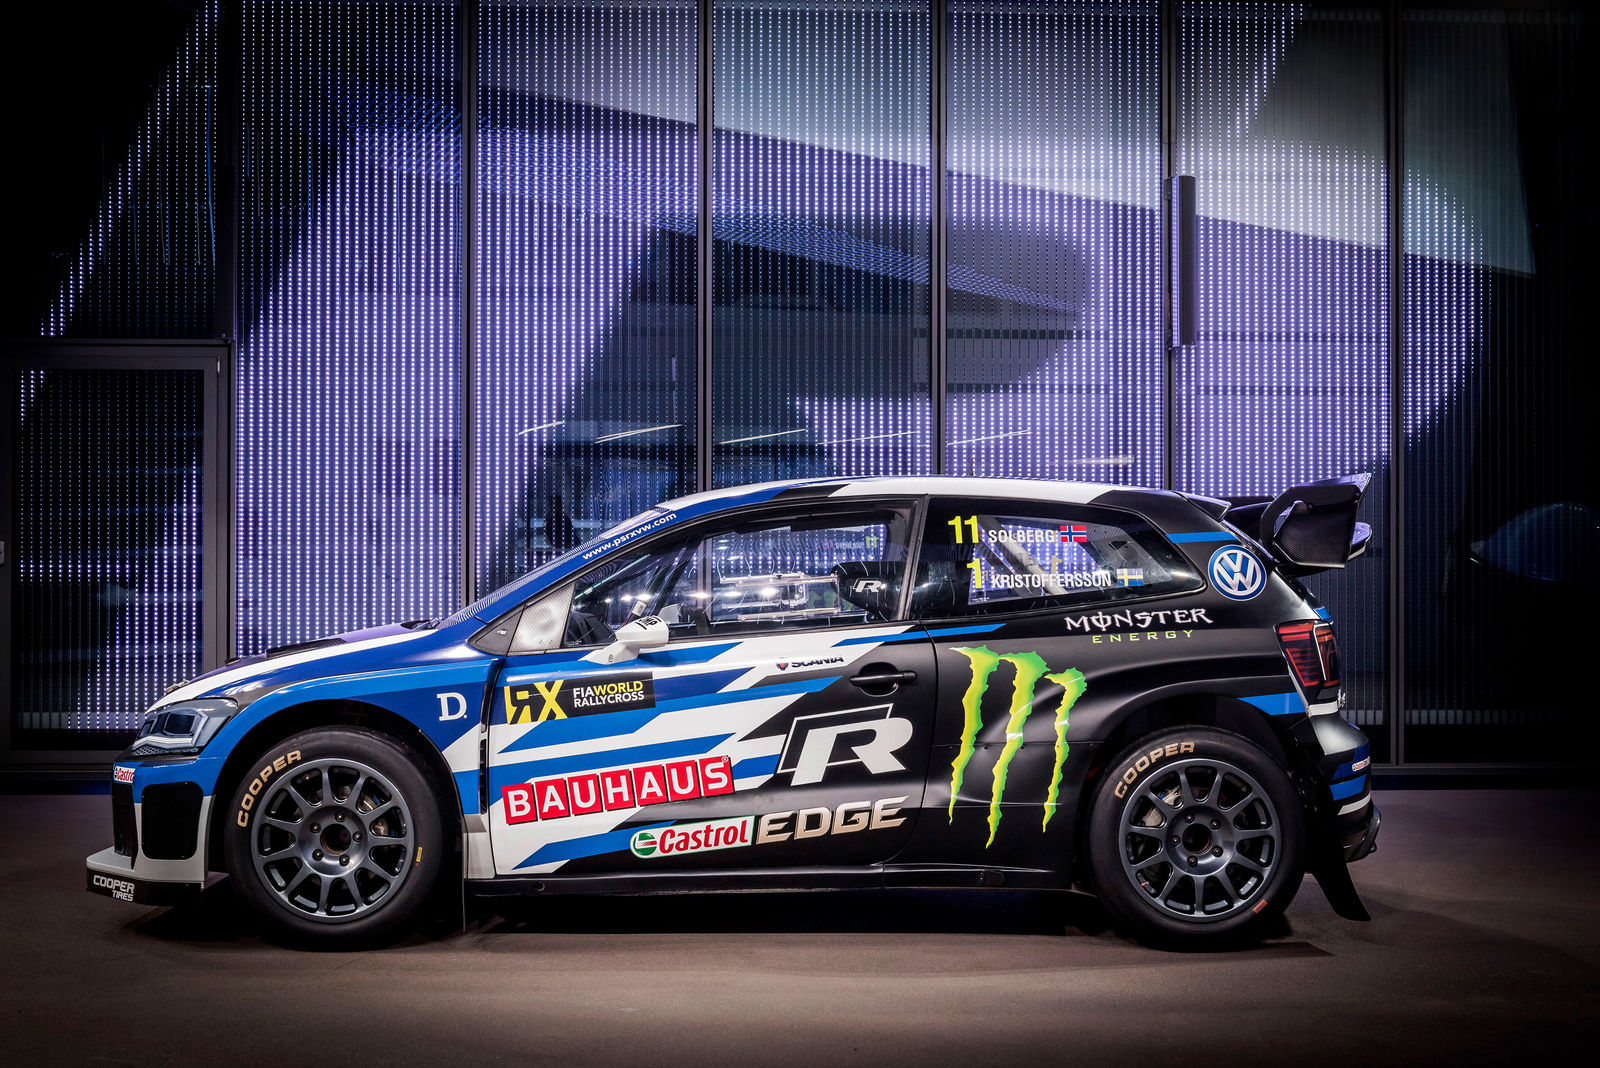 The new Polo R Supercar for the FIA World Rallycross Championship